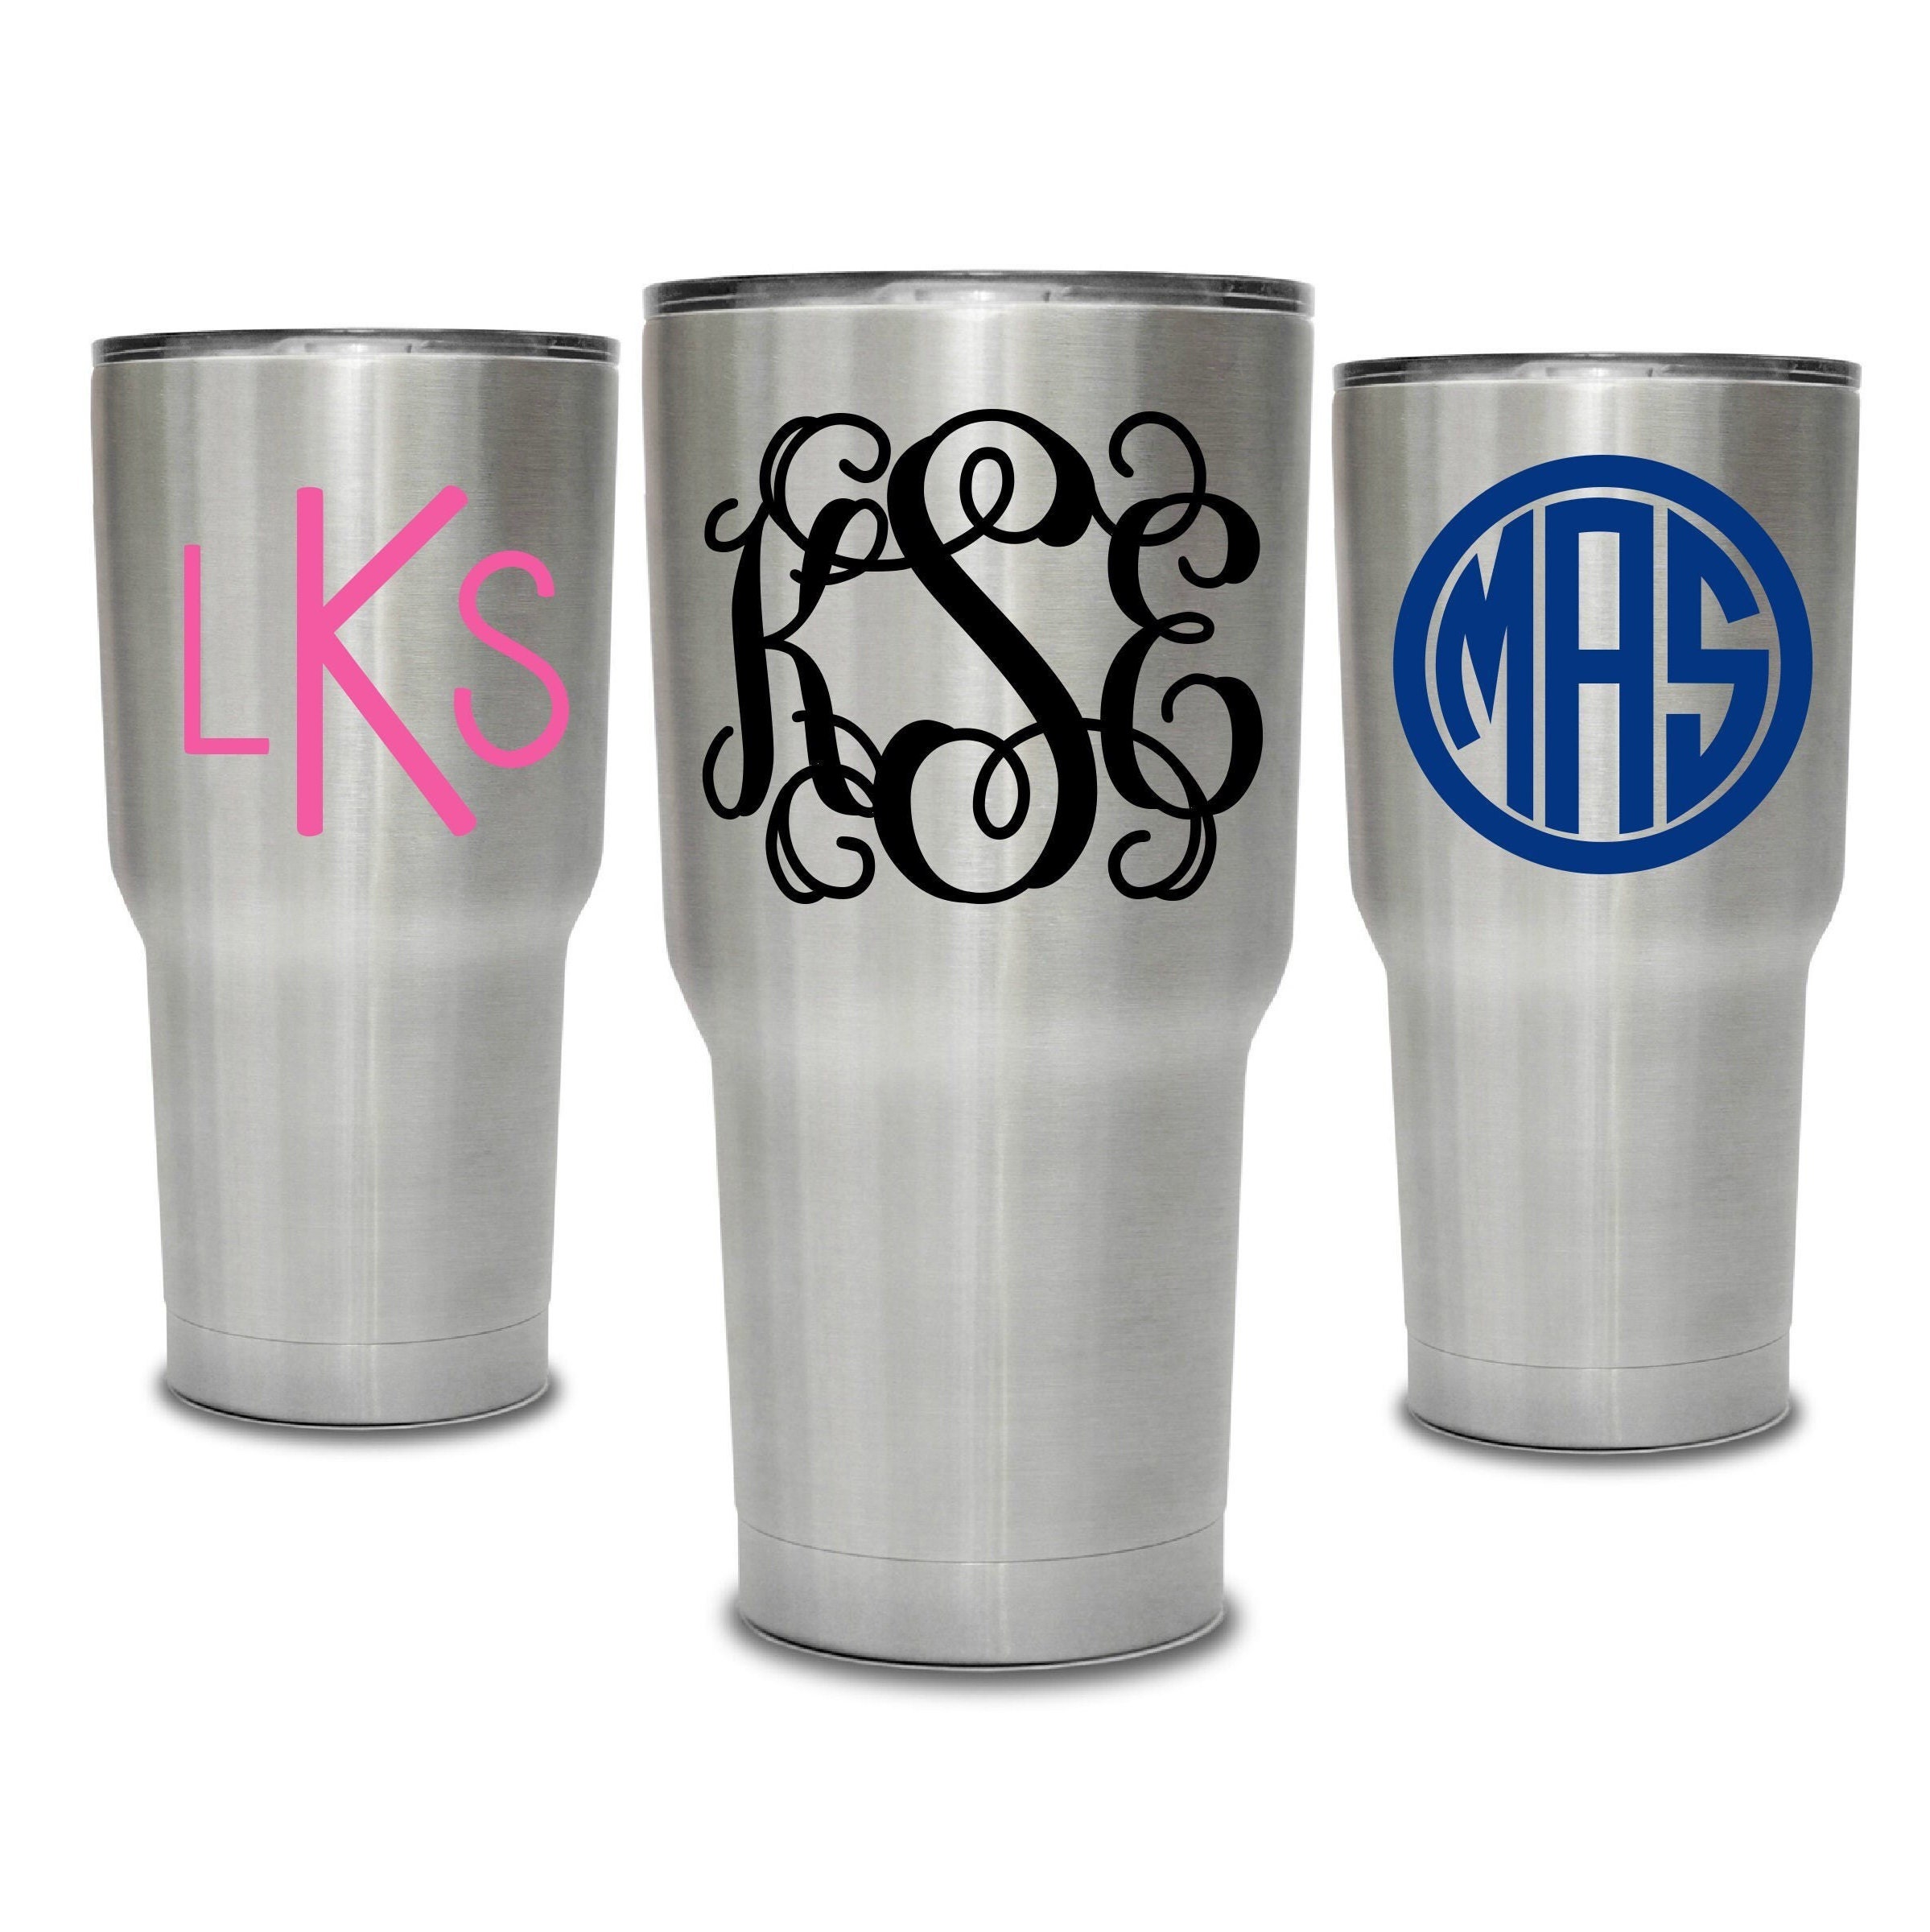 Chevron Monogram Letter Vinyl Sticker Decals for RTIC or Yeti Tumblers, 3- Inch, Set of 2